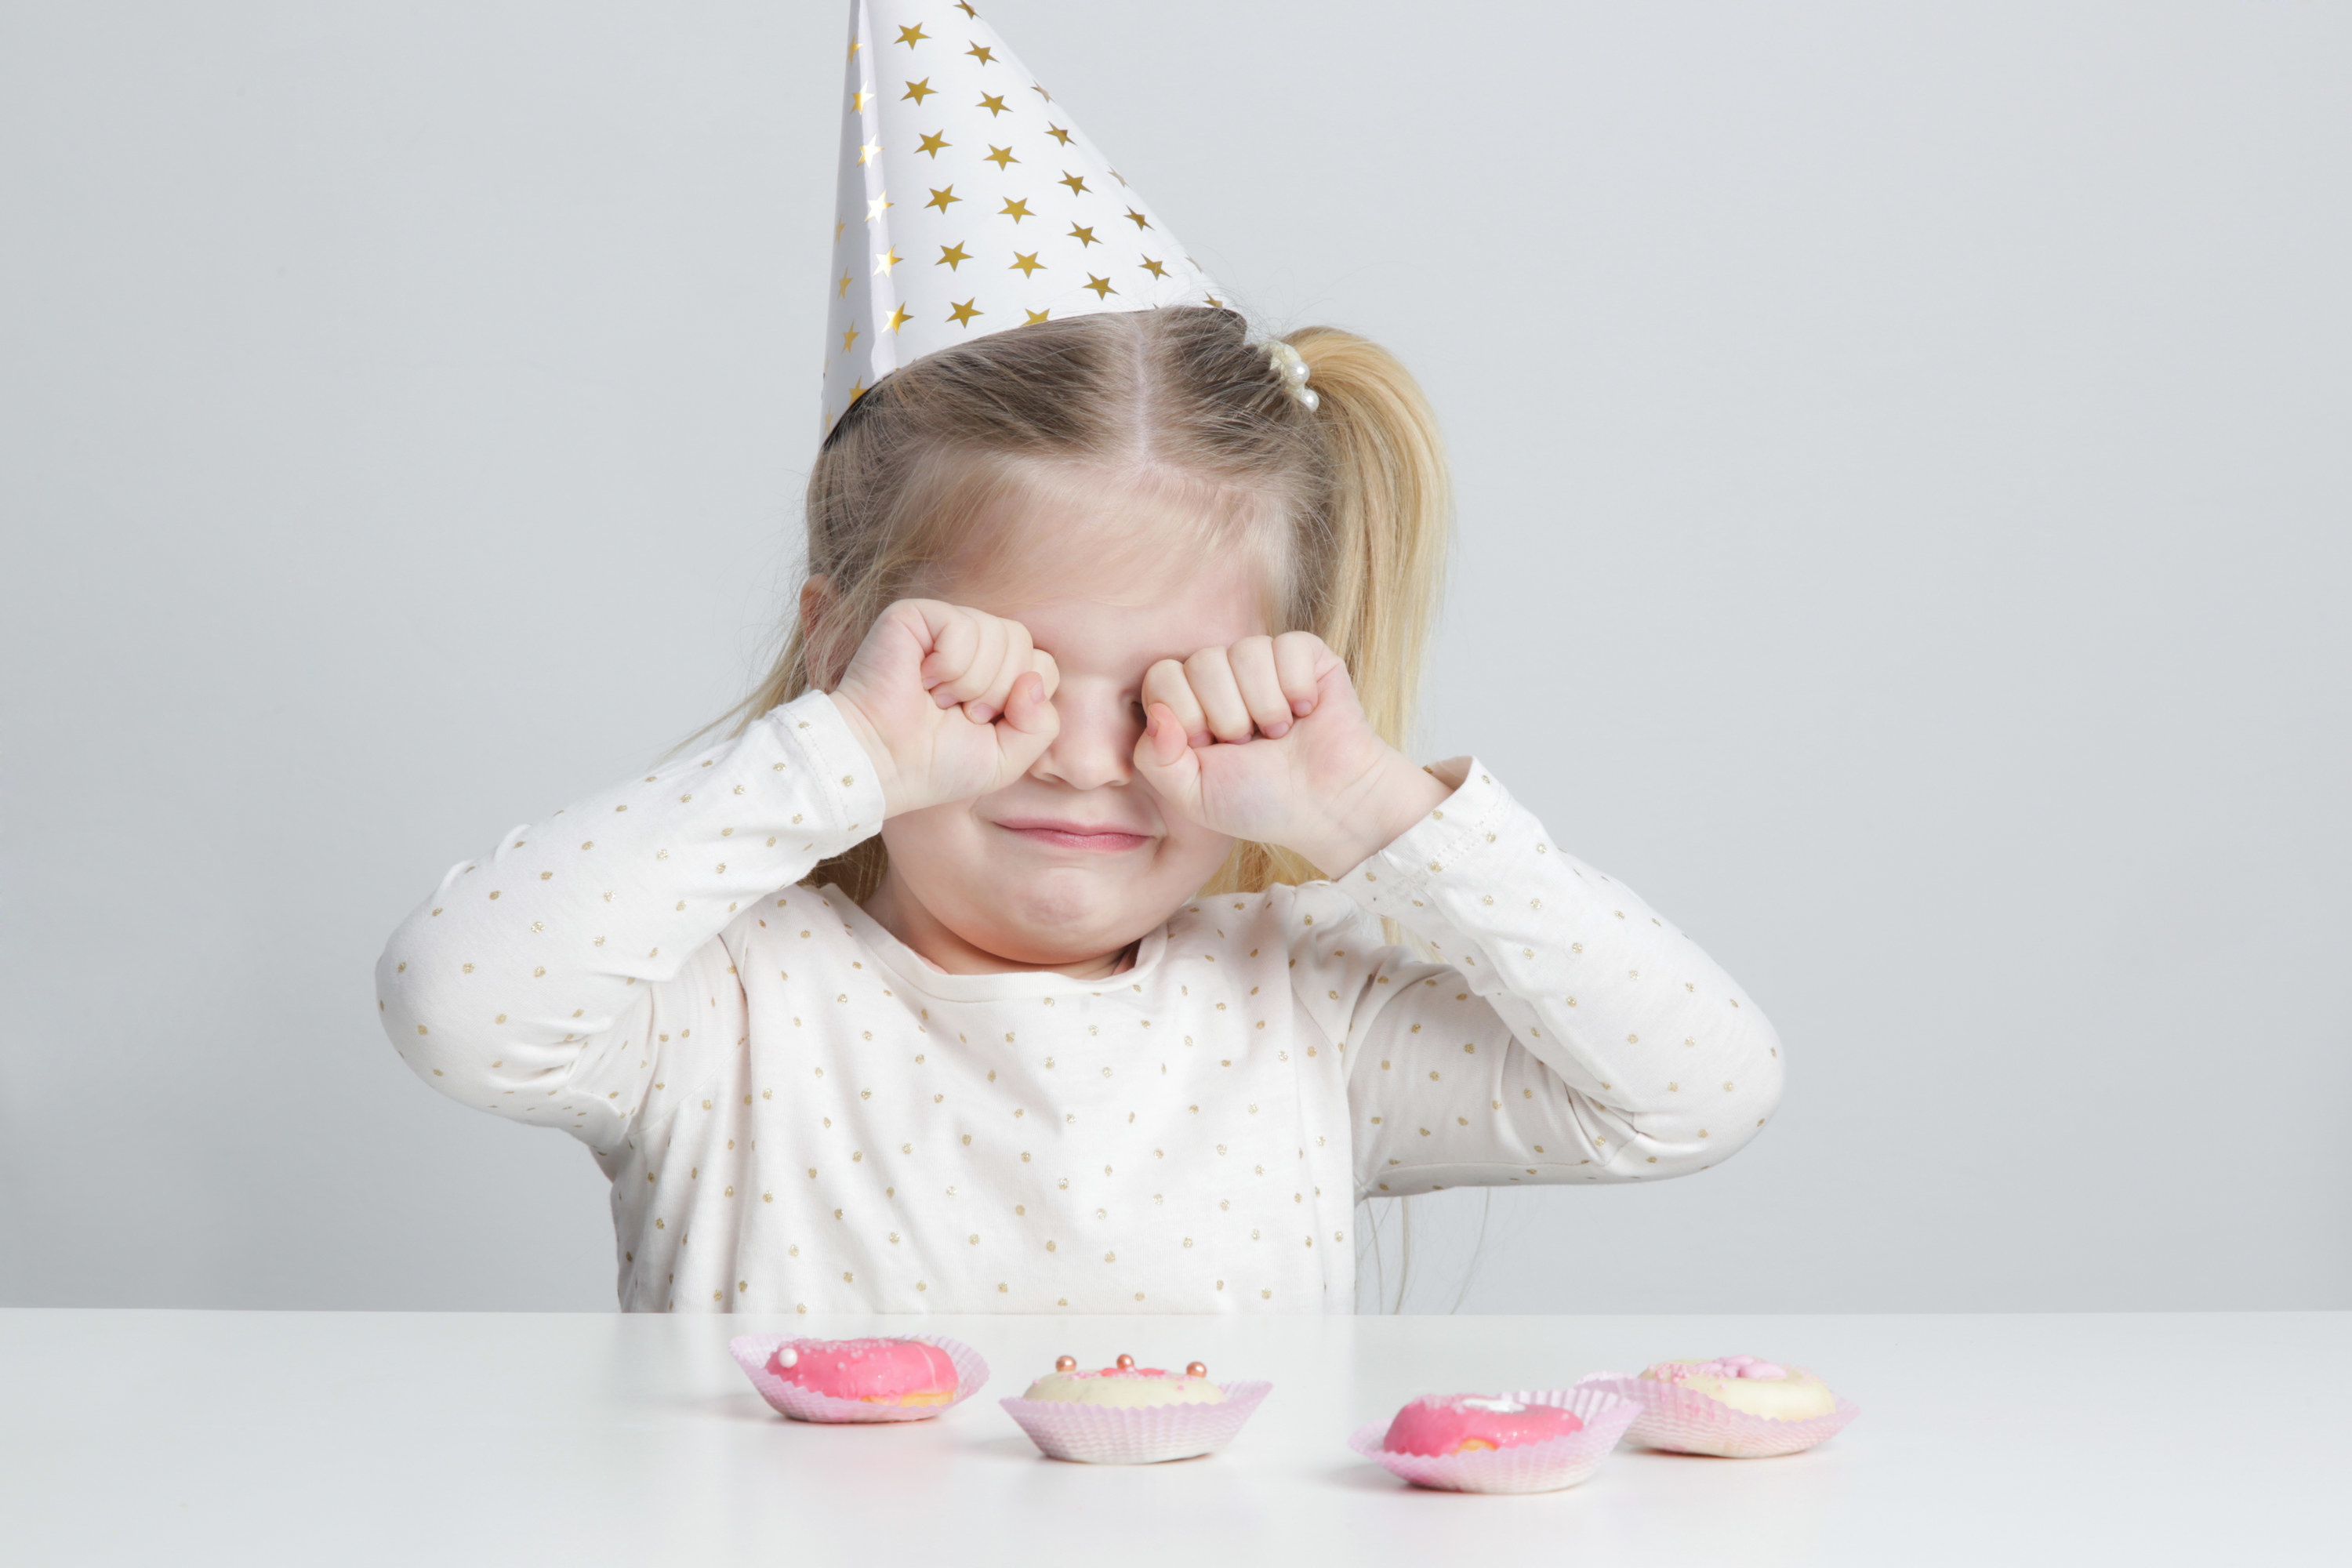 Displeased little girl with birthday hat and donuts in front of her